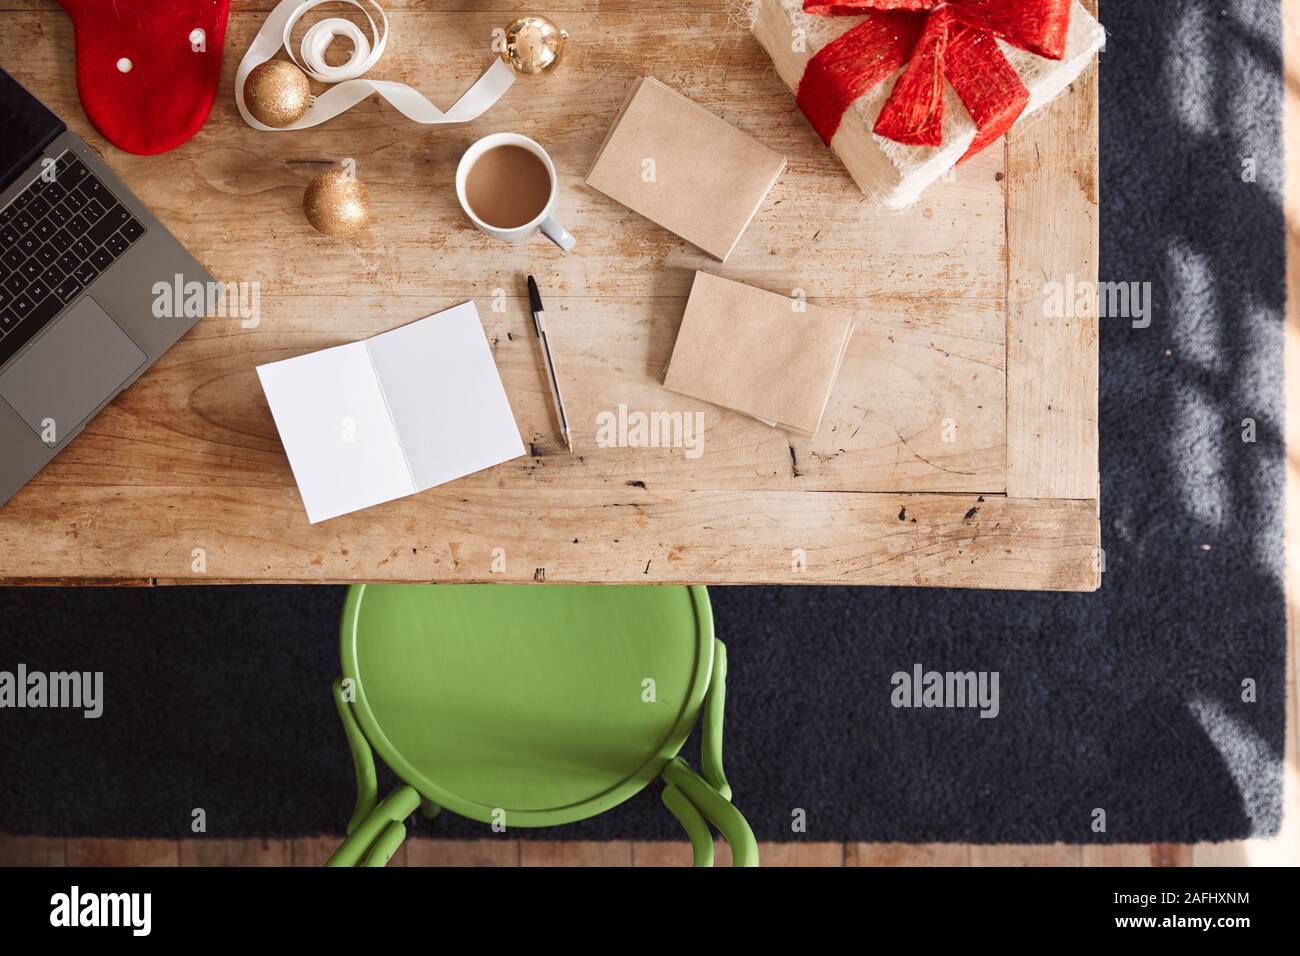 Overhead Shot Looking Down On Blank Christmas Card And Wrapped Gift Wearing On Table Stock Photo